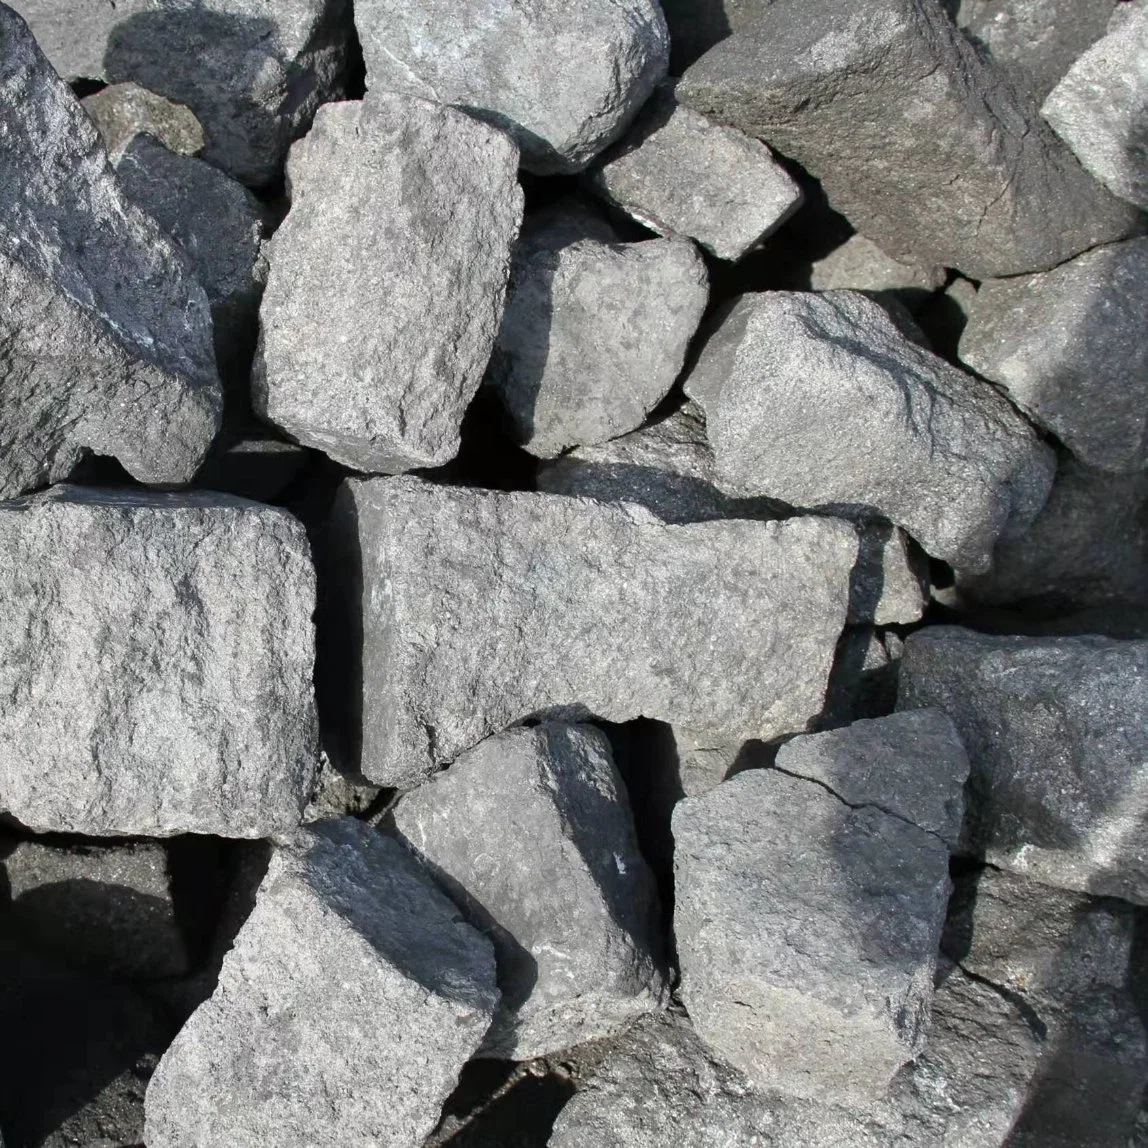 Foundry/Metallurgical Coke Size 90-150mm, 100-300m, 100-300mm Ash: 10% Max, 13.5% Max, etc.